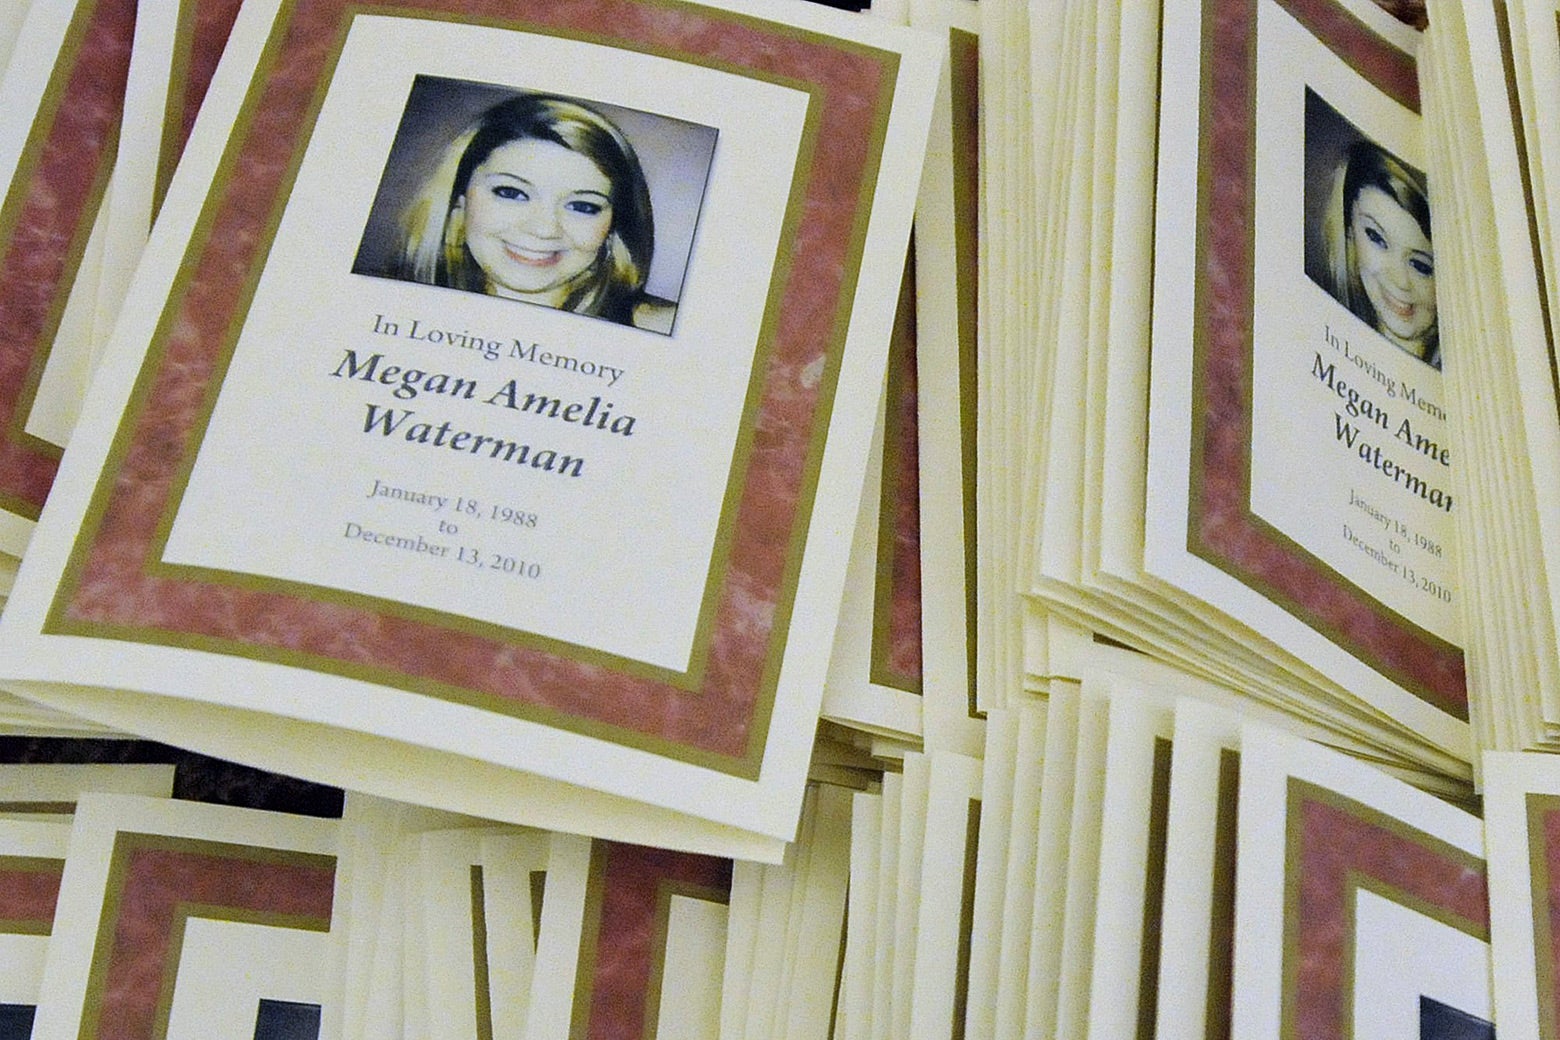 A stack of funeral programs featuring a photo of a young woman and the words "In Loving Memory: Megan Amelia Waterman."